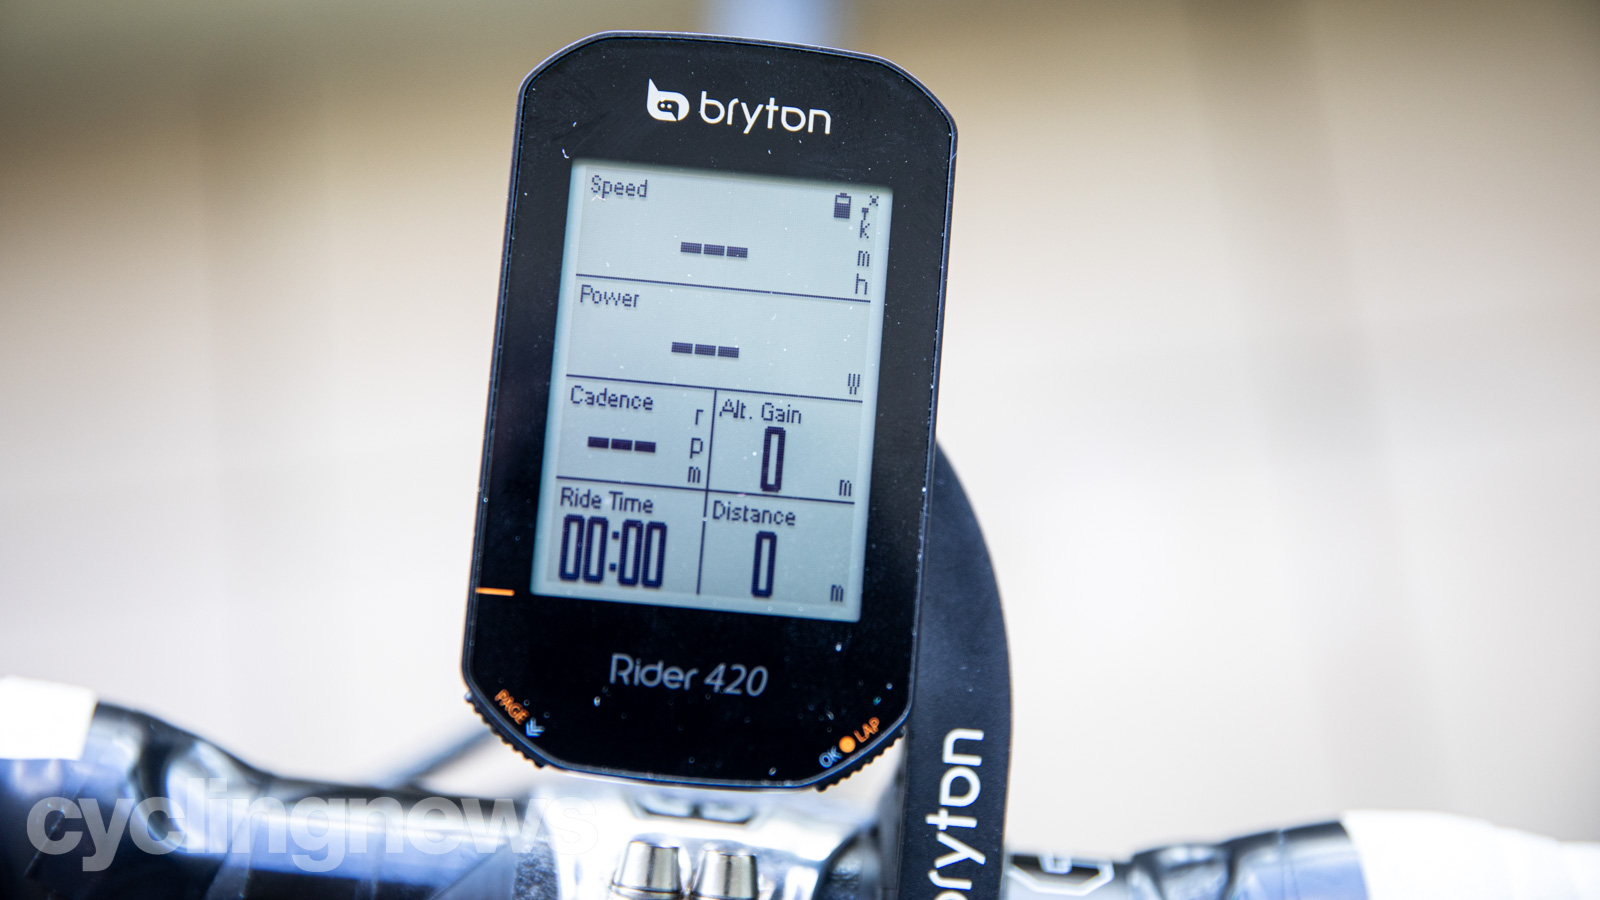 Bryton Rider 440 smart computer mounted to a set of handlebars, with speed, power, cadence, altitude gain, ride time, and distance on the black and white screen